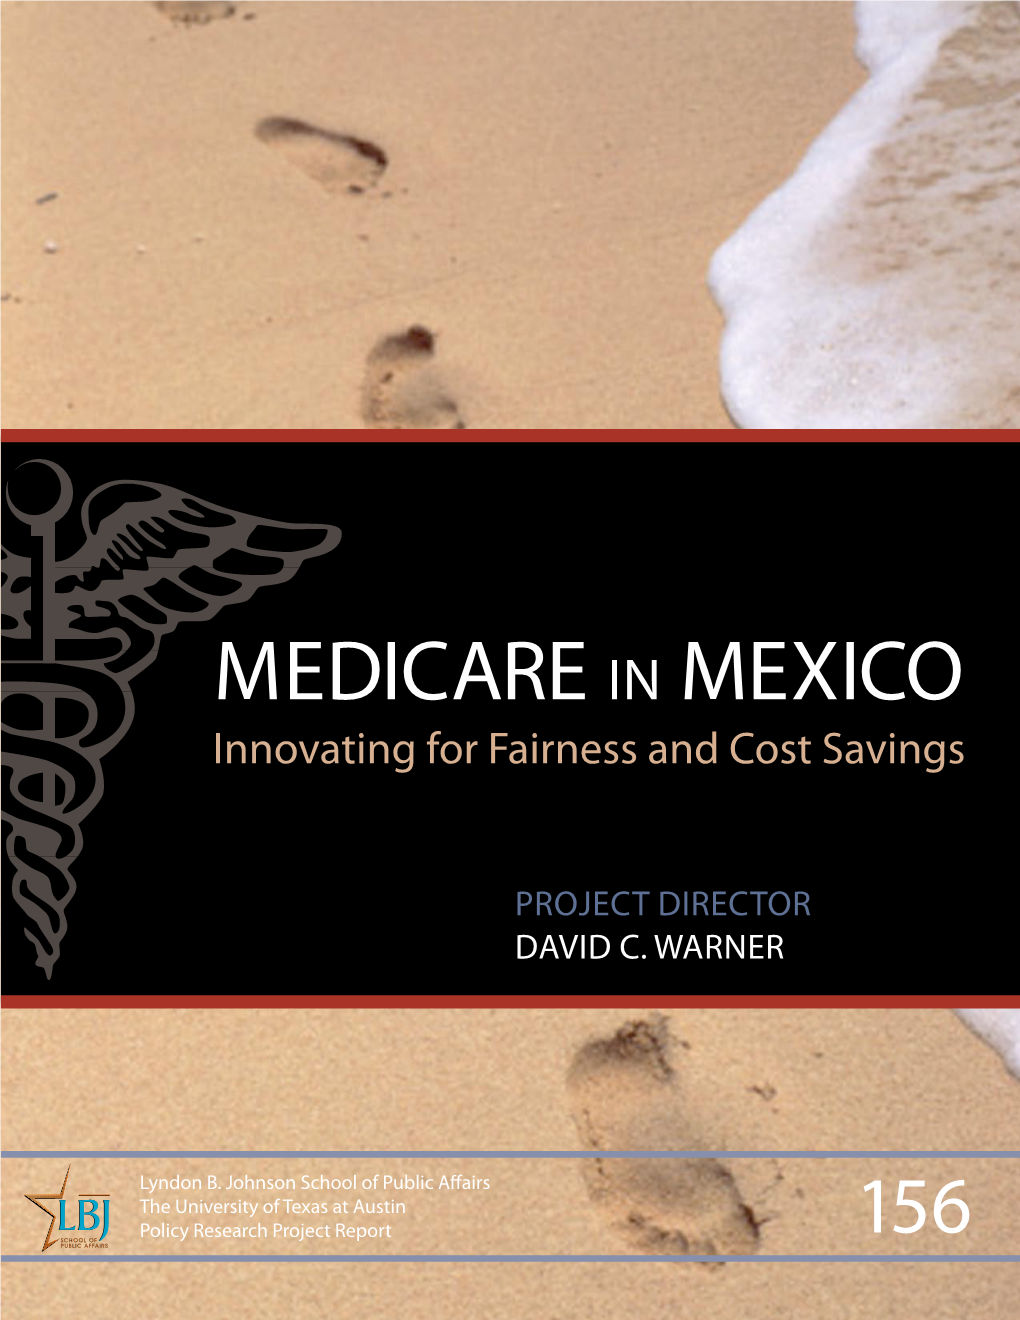 Medicare in Mexico Innovating for Fairness and Cost Savings